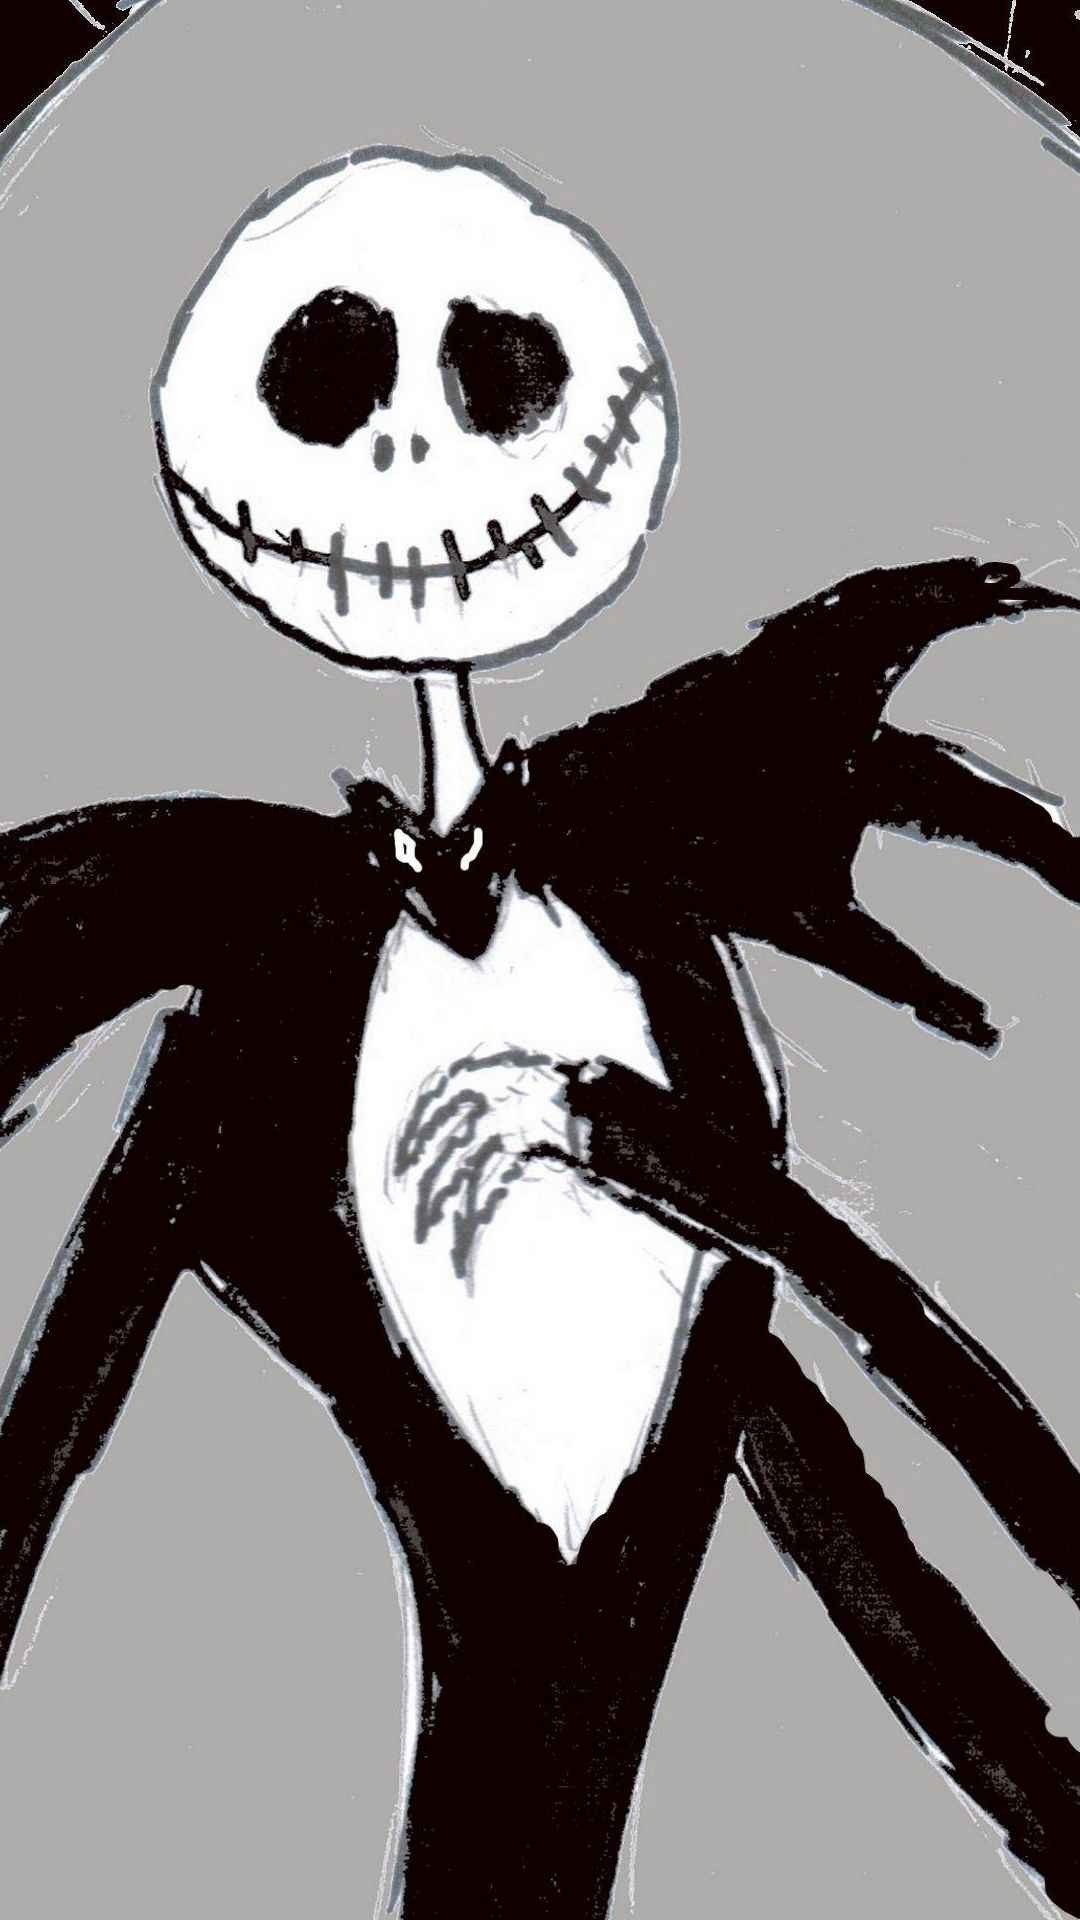 1080x1920 Halloween Jack Skellington iPhone 6 plus wallpaper that's perfect for girls  in 2015 from sunvey - LoveItSoMuch